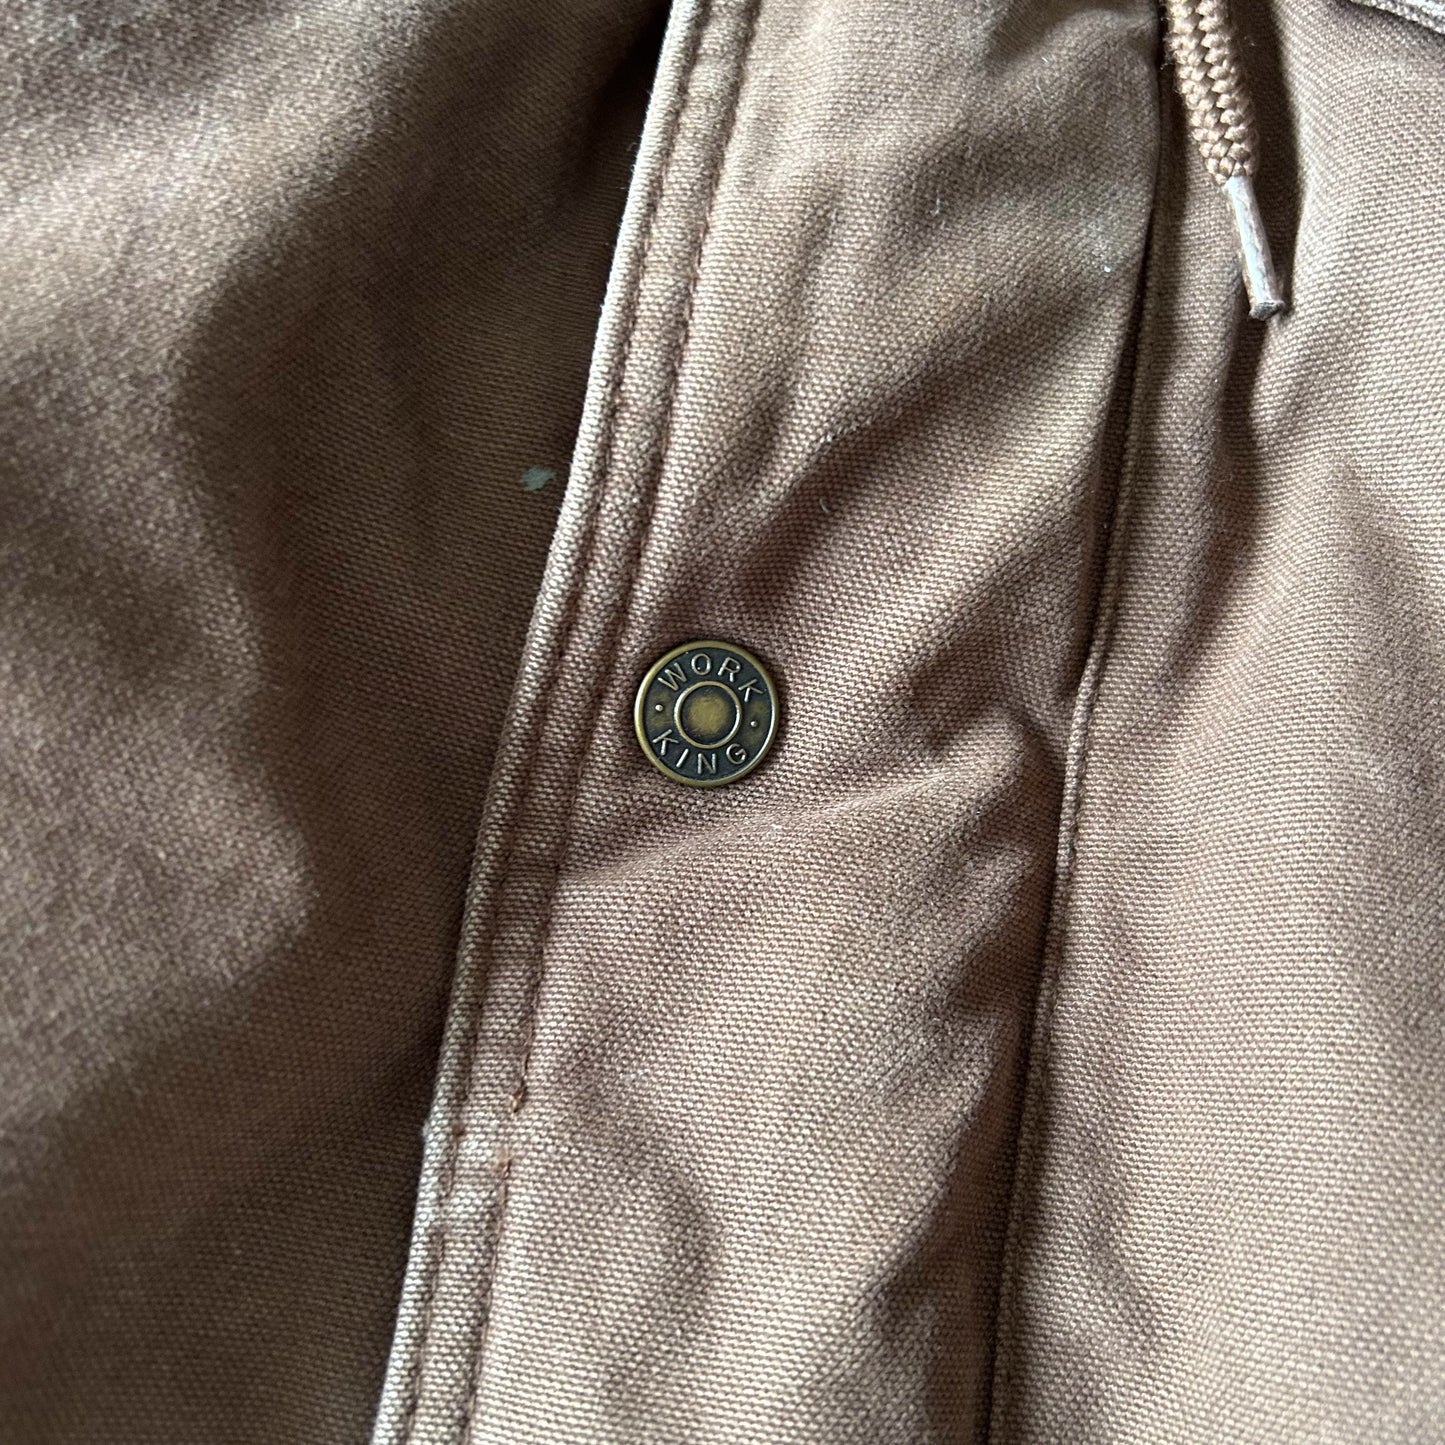 2000s - work king insulated work jacket